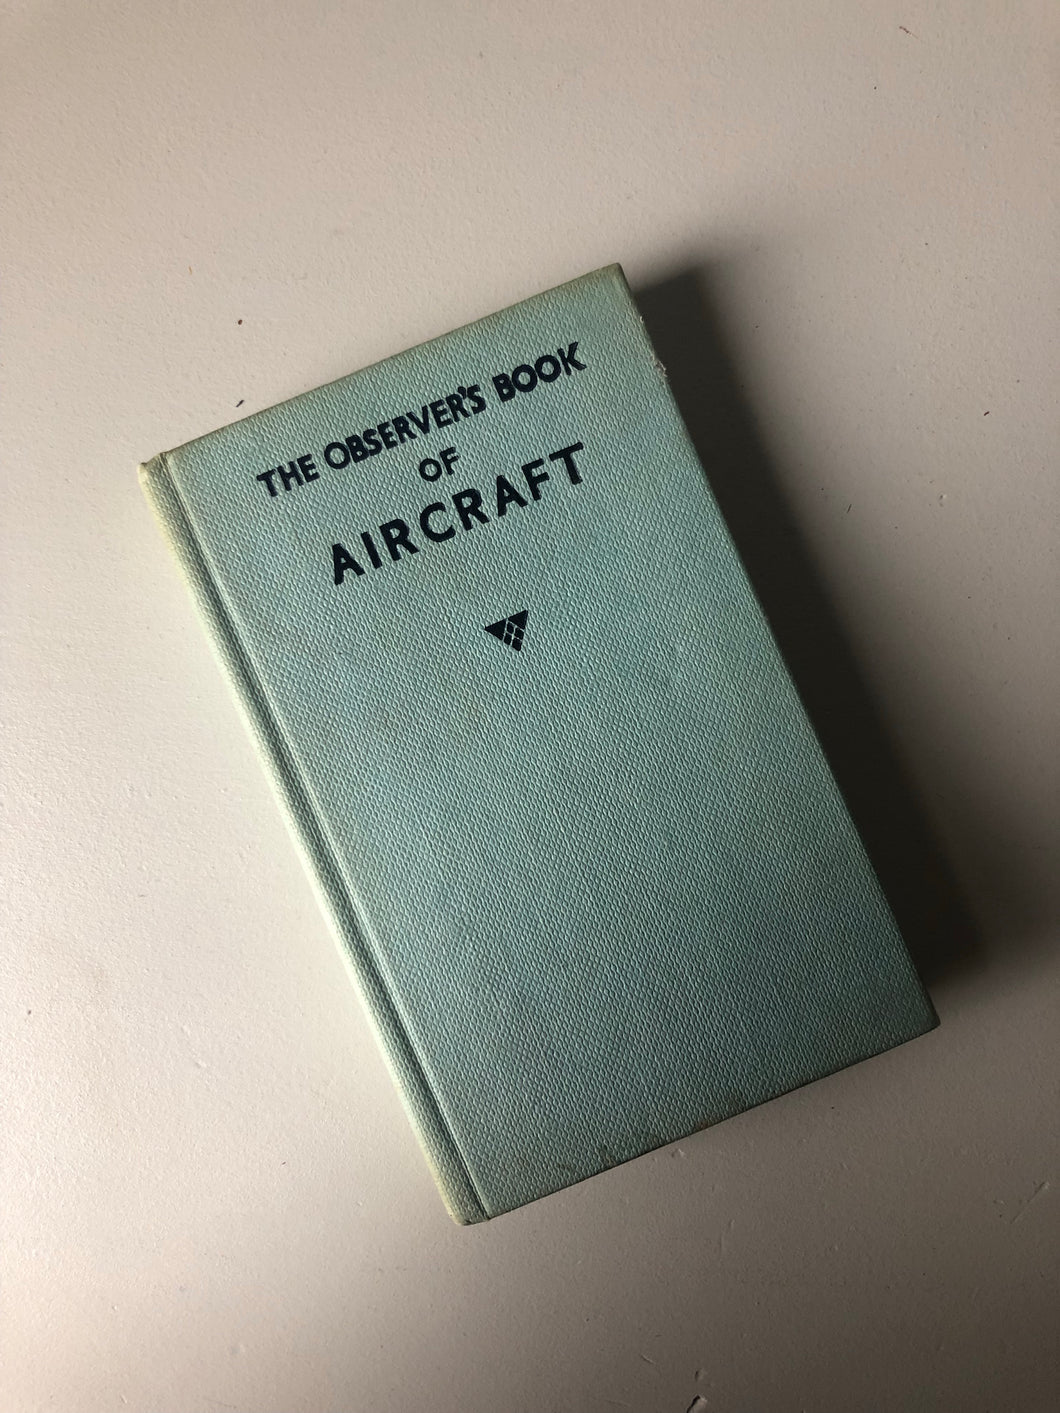 NEW - Vintage Observer Book of Aircraft